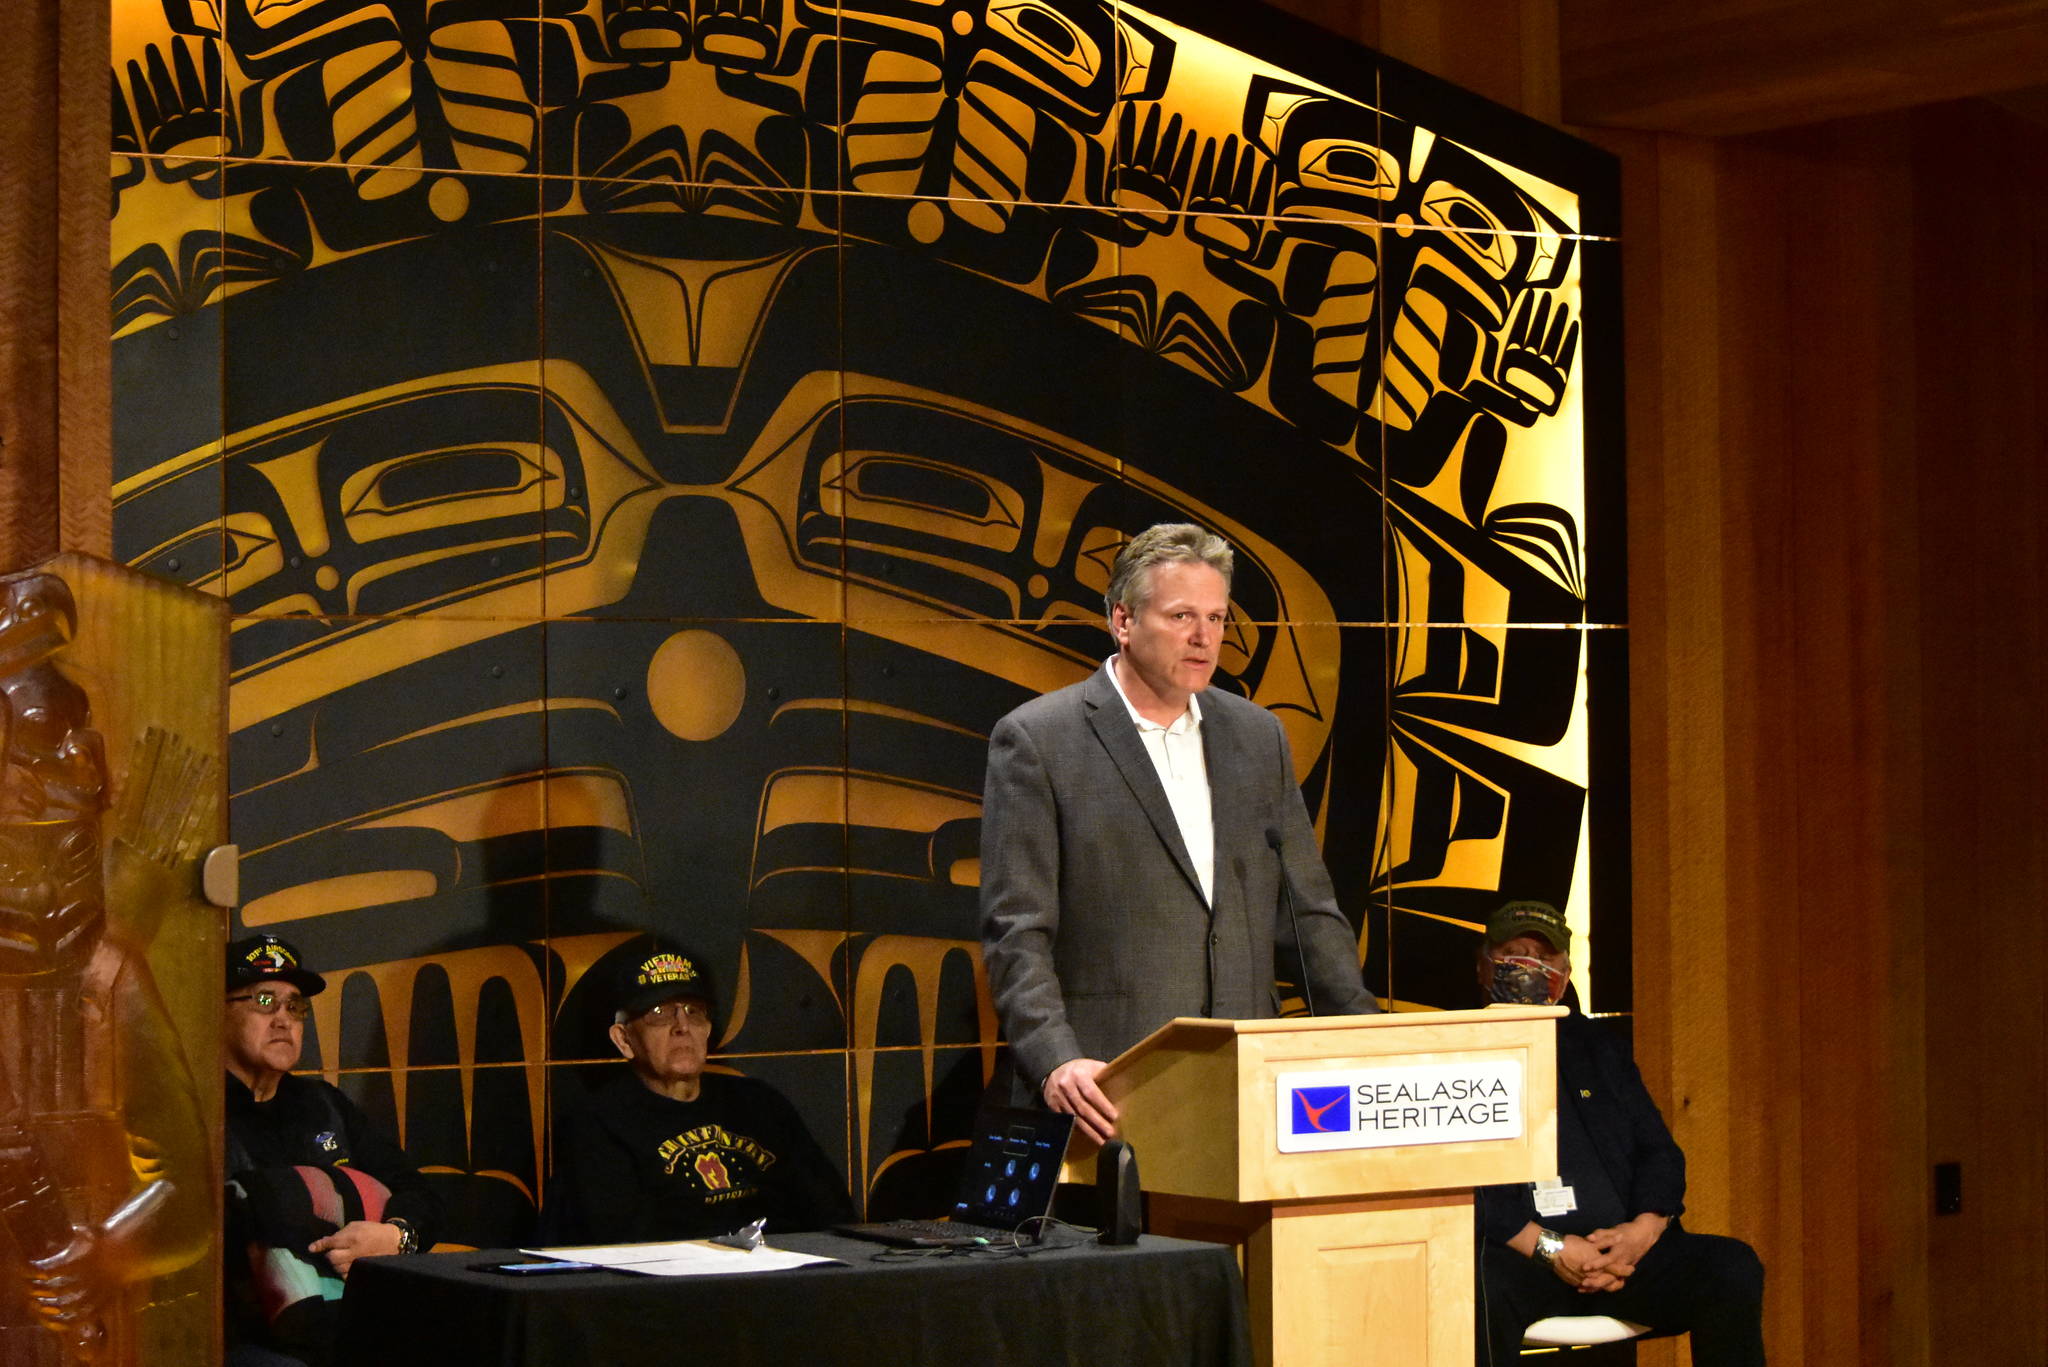 Gov. Mike Dunleavy speaks at a ceremony for Alaska Native Veterans from the Vietnam era at the Walter Soboleff Building in downtown Juneau on May 5, 2021. Dunleavy announced the state filed a lawsuit Wednesday against the Biden administration for what Dunleavy says is illegally keeping restrictions in place on federal lands in Alaska. (Peter Segall / Juneau Empire)